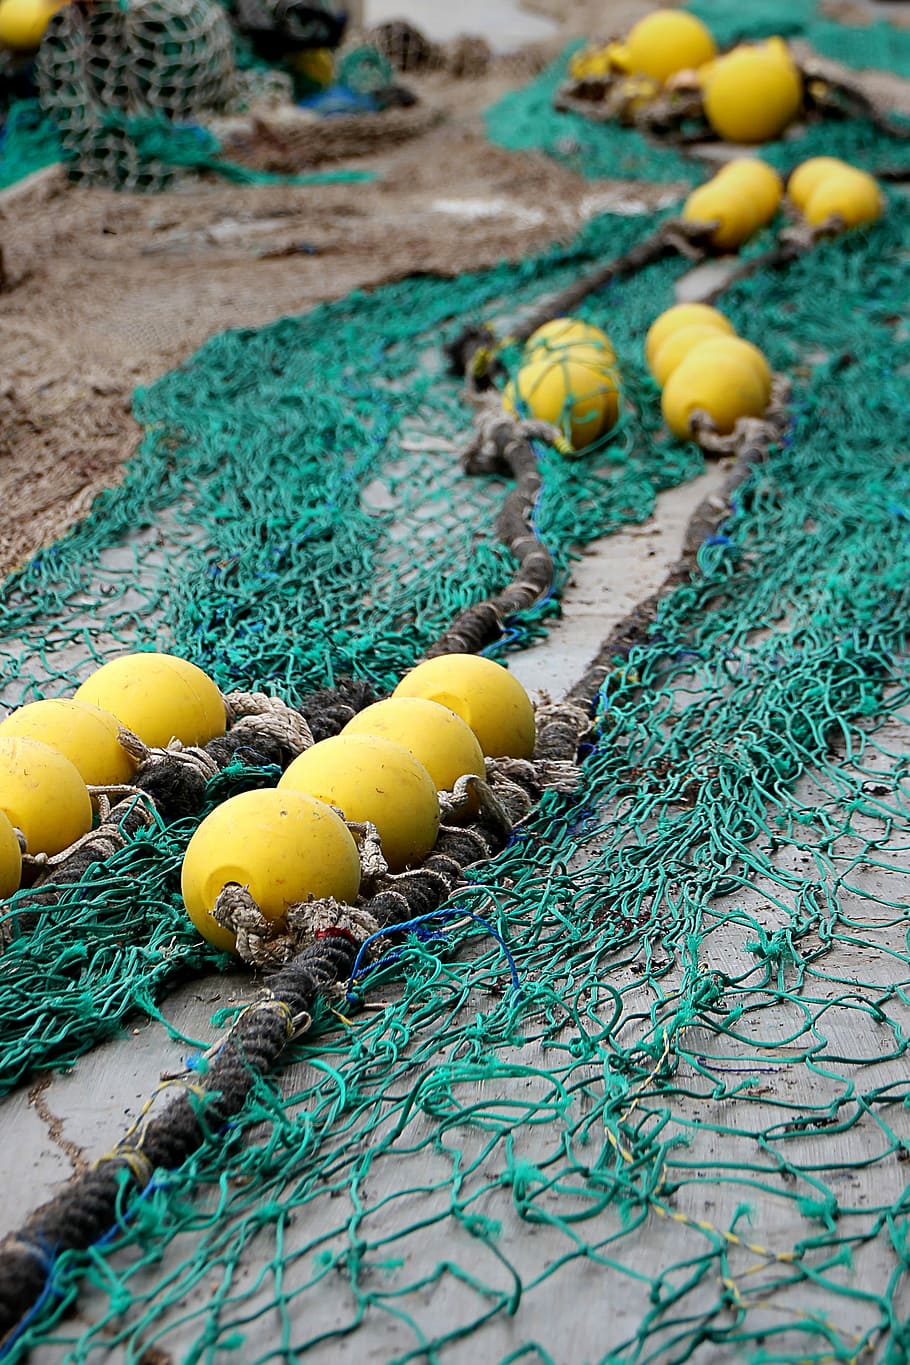 Fishing Net, Port, Network, fishing, safety net, dry nets, rope, yellow, buoy, day